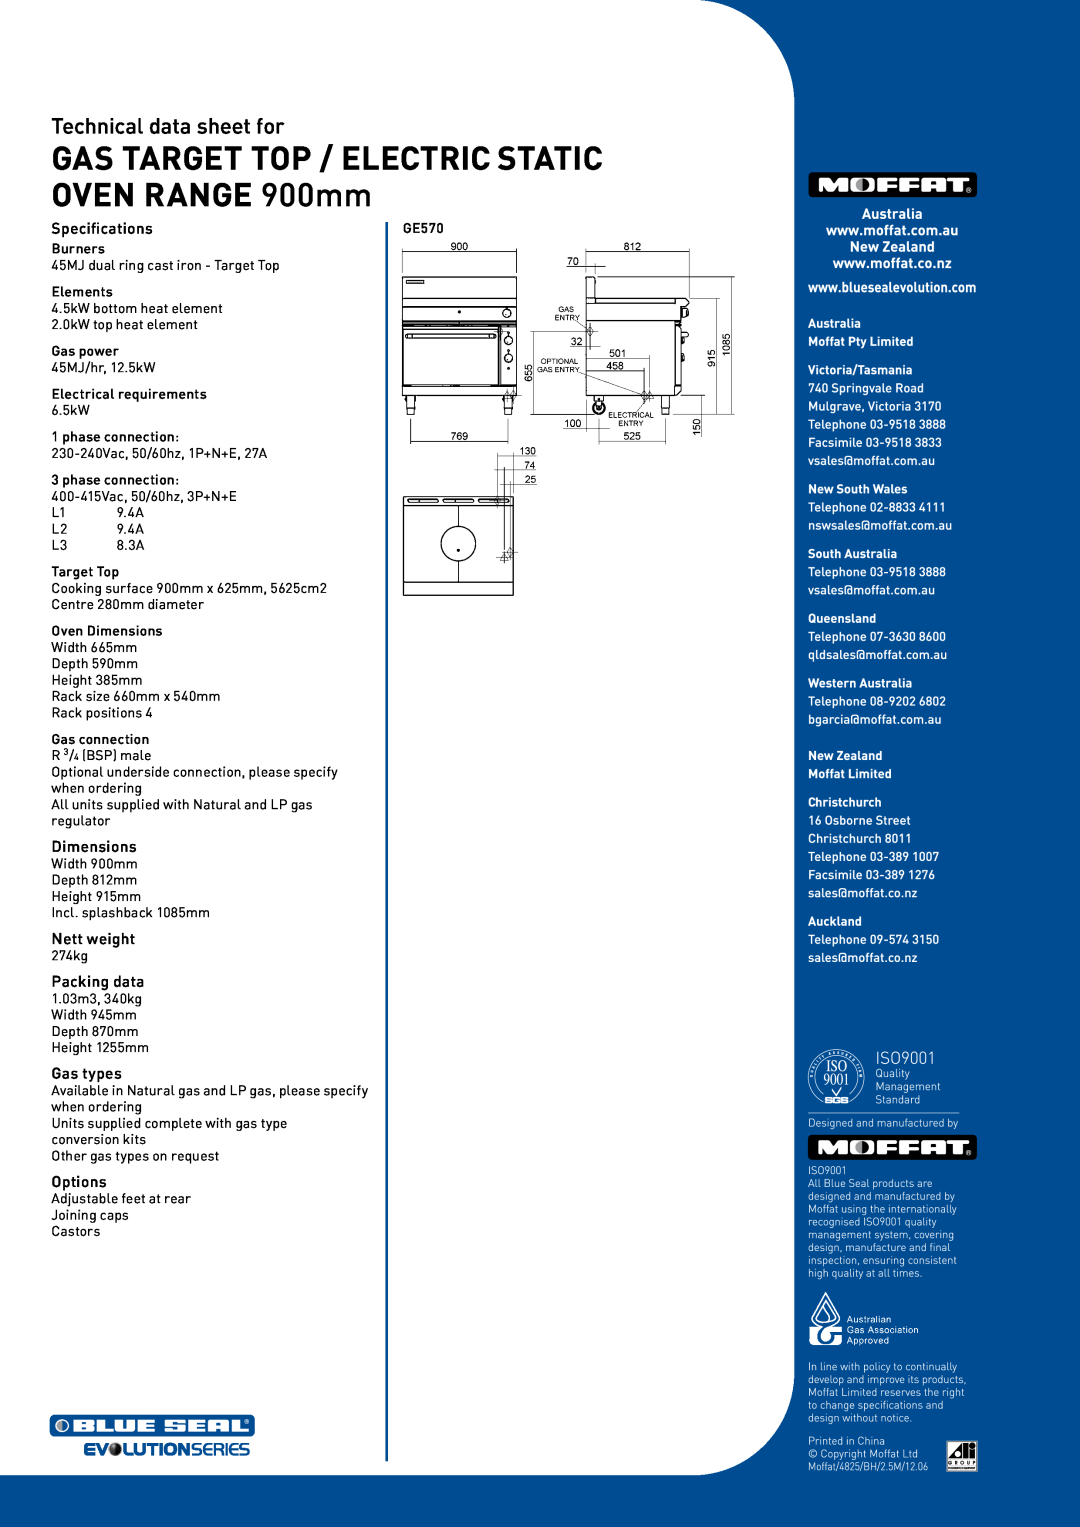 Moffat GE570 manual Specifications, Dimensions, Nett weight, Packing data, Gas types, Options, Technical data sheet for 